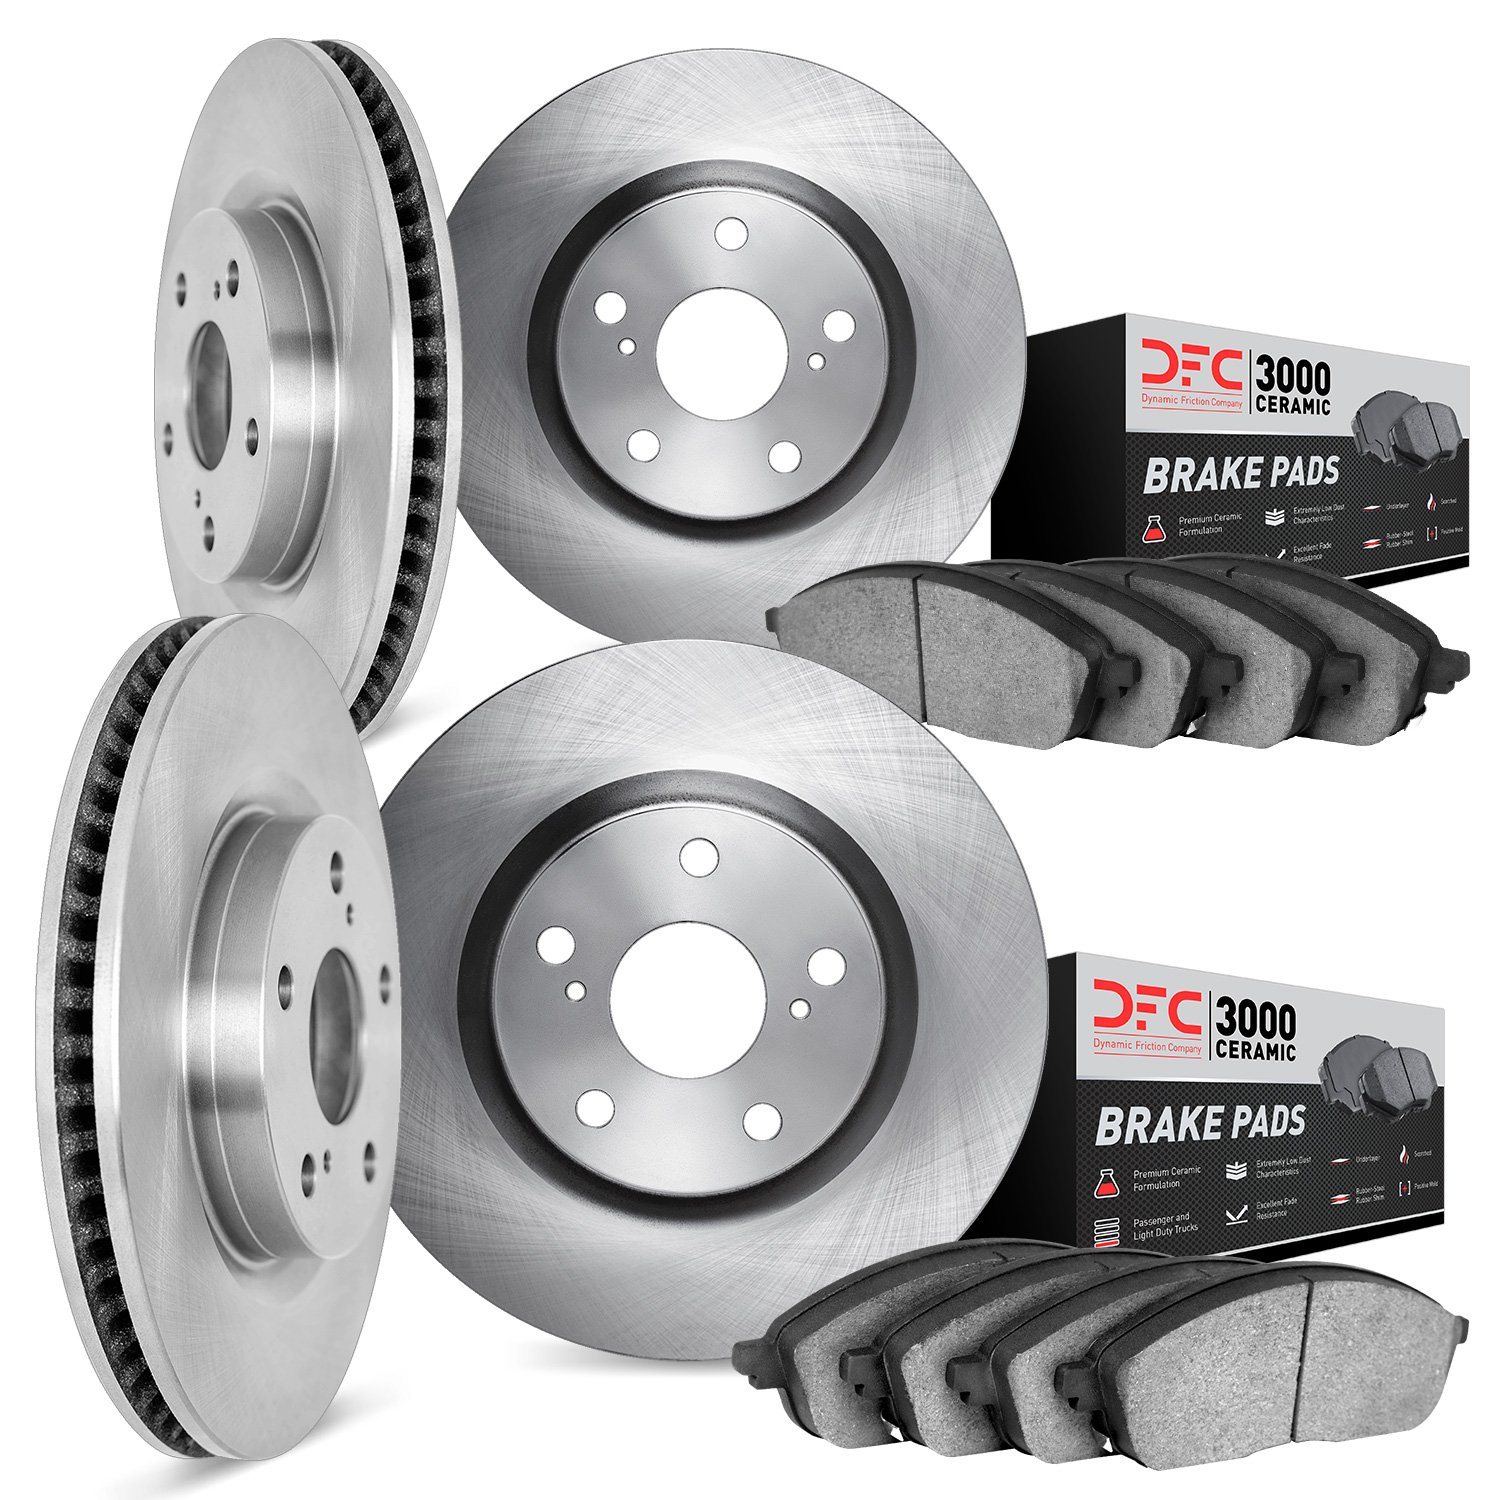 6304-75003 Brake Rotors with 3000-Series Ceramic Brake Pads Kit, 1992-1998 Lexus/Toyota/Scion, Position: Front and Rear